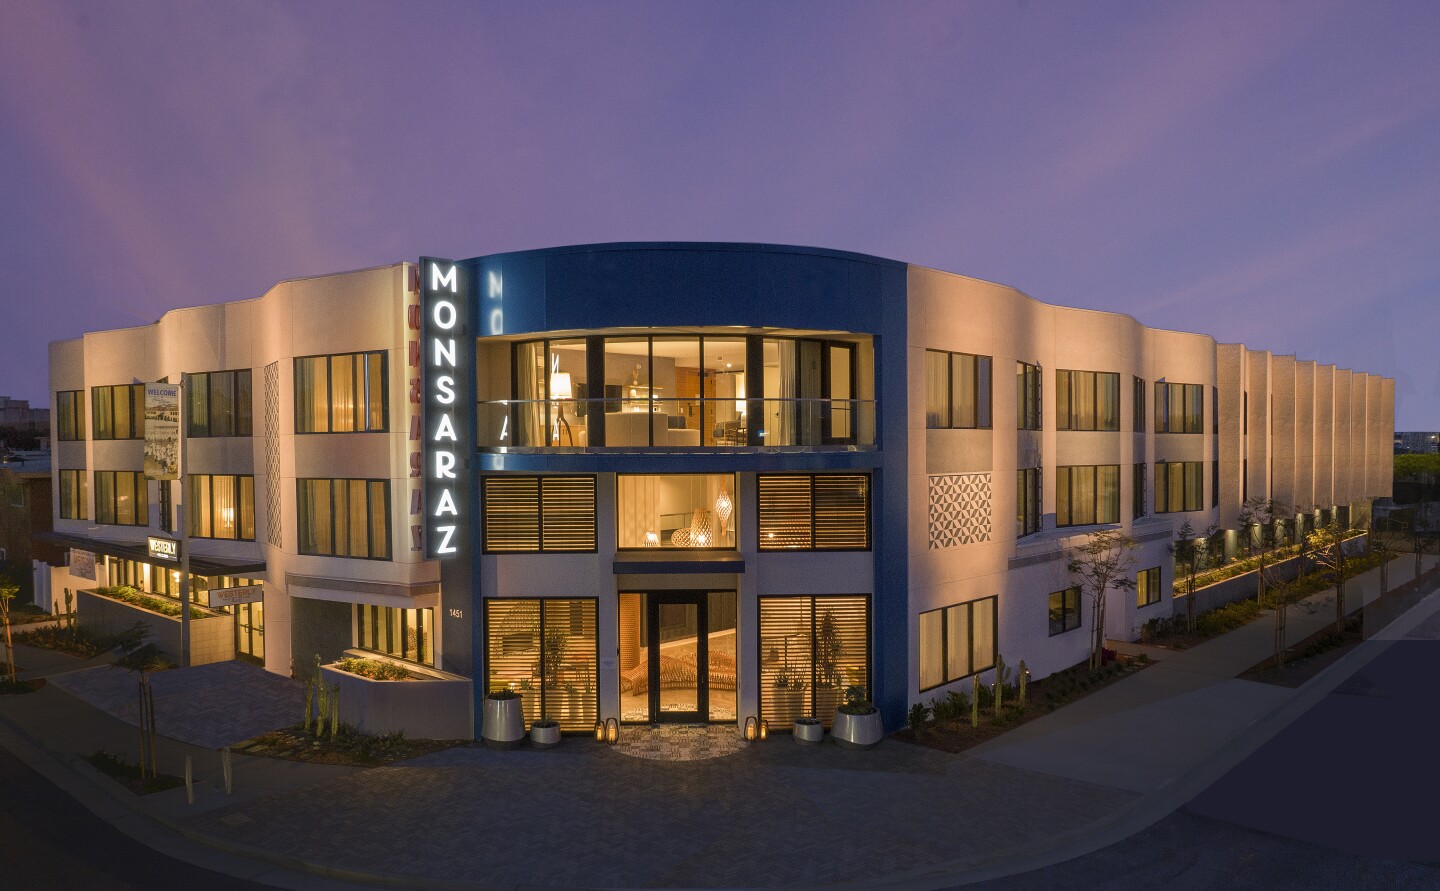 The Monsaraz San Diego is Point Loma’s first new hotel in more than a decade.